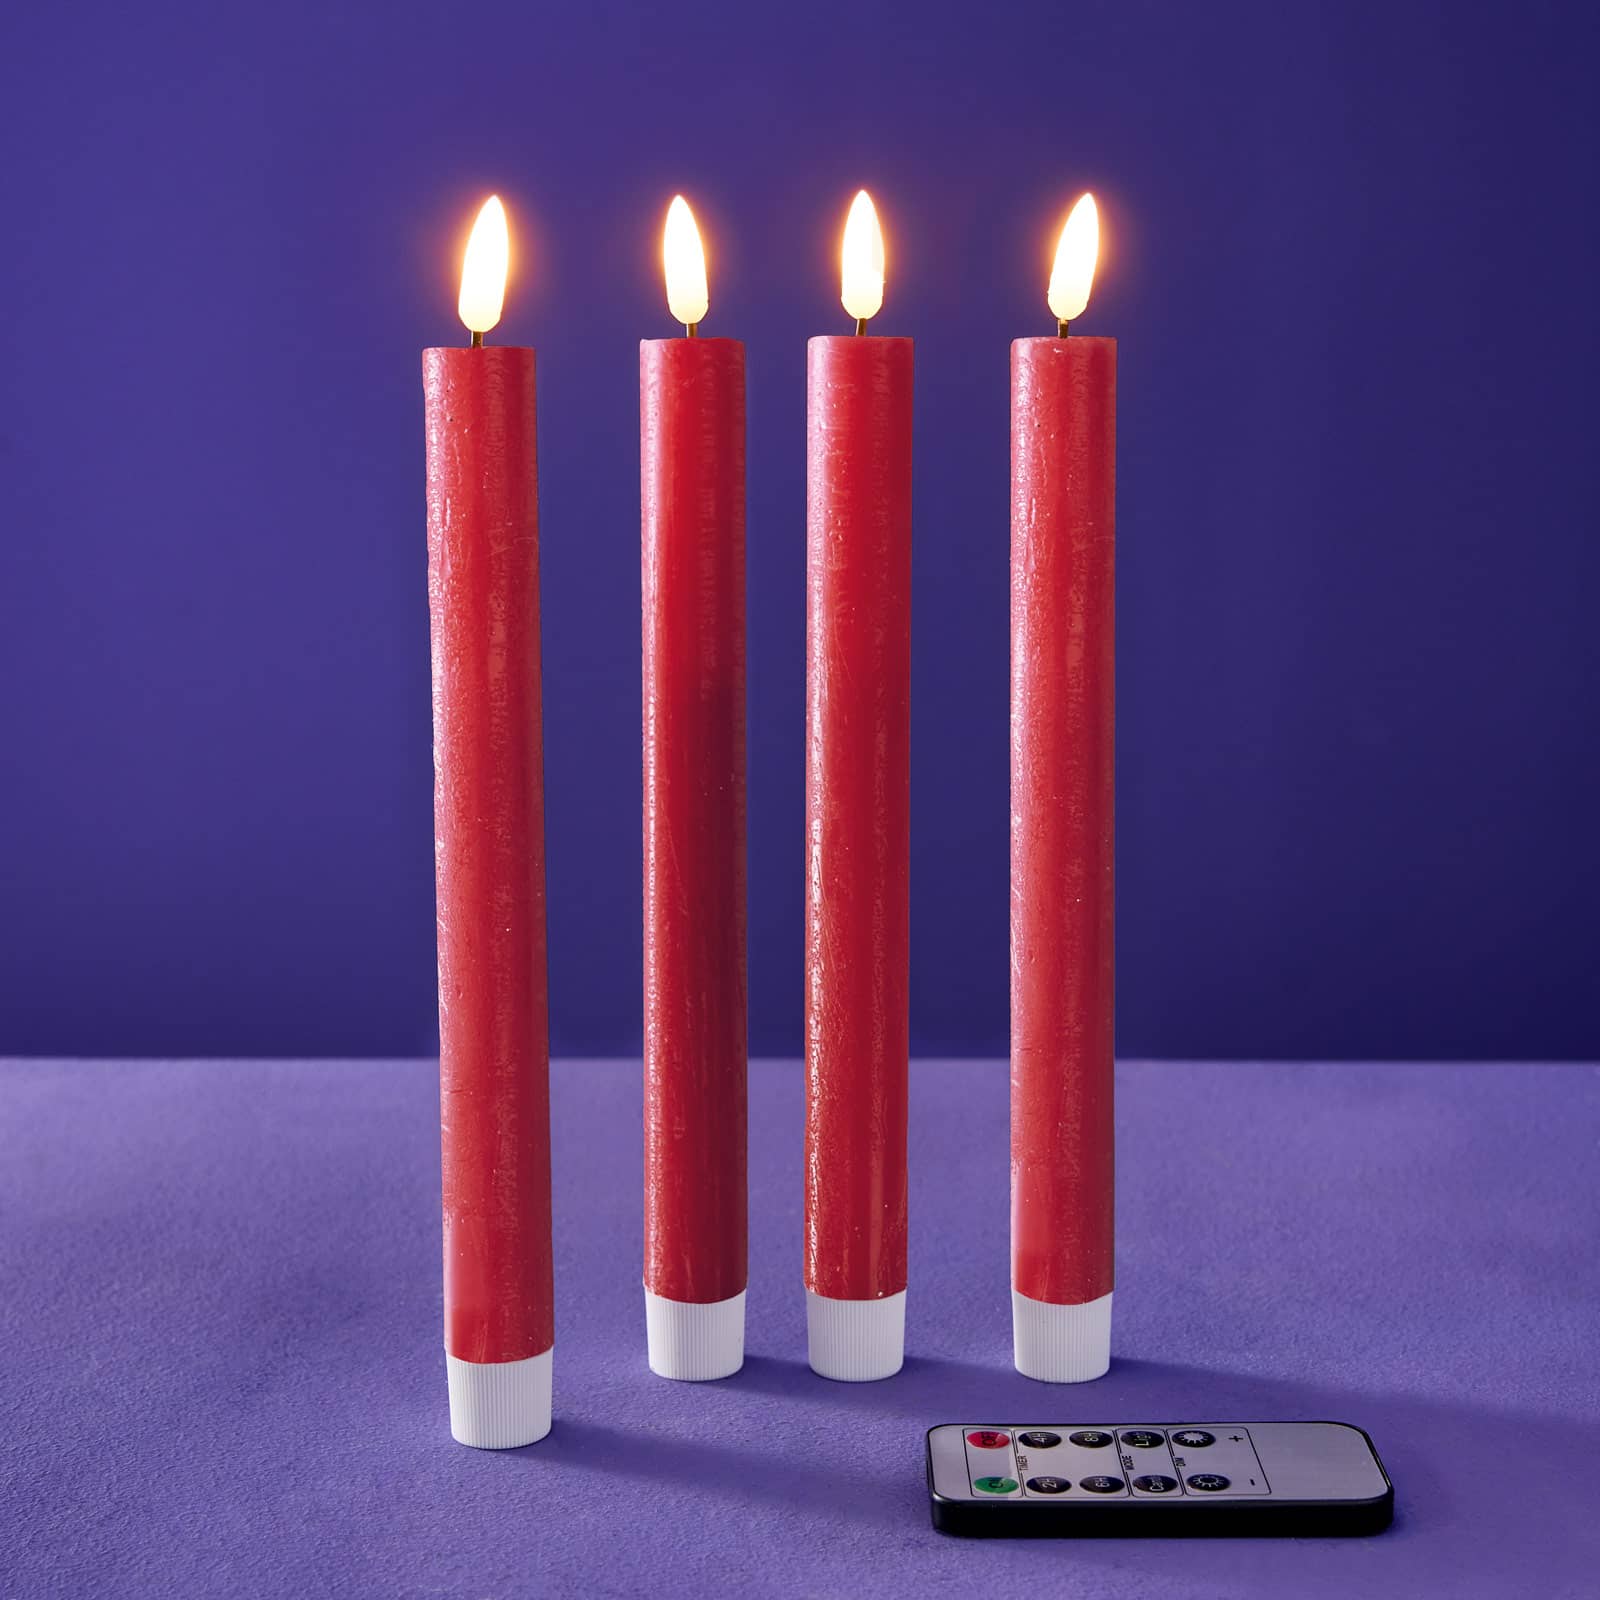 Set of 4 LED stick candles, red